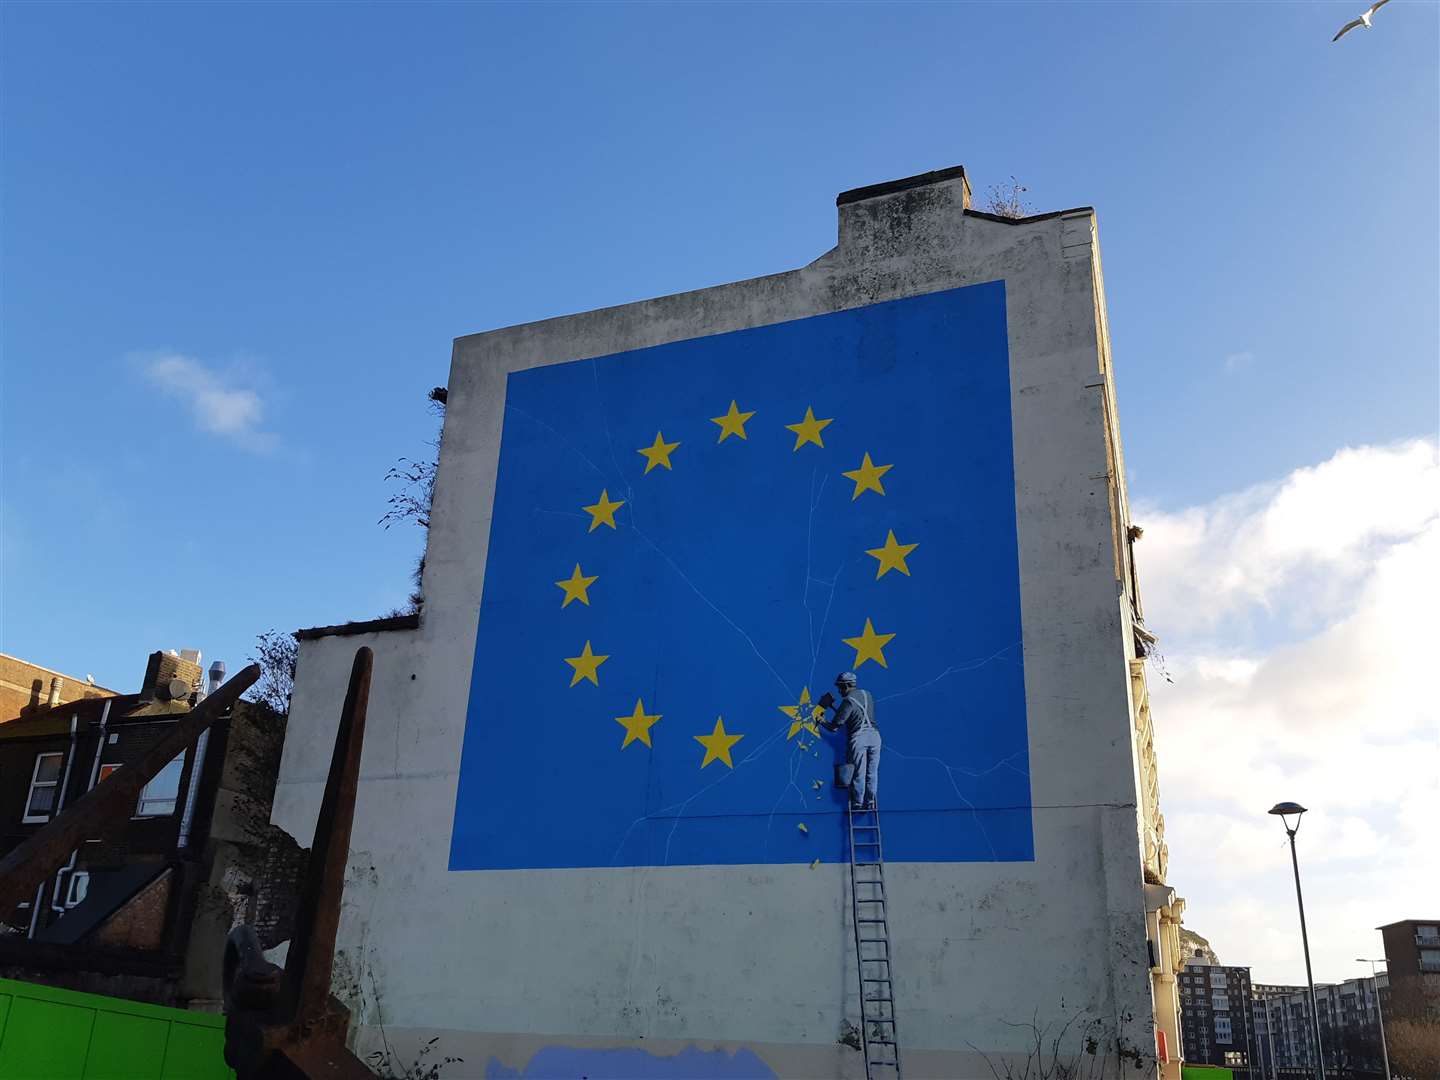 The Banksy Mural in Dover, before it was whitewashed over